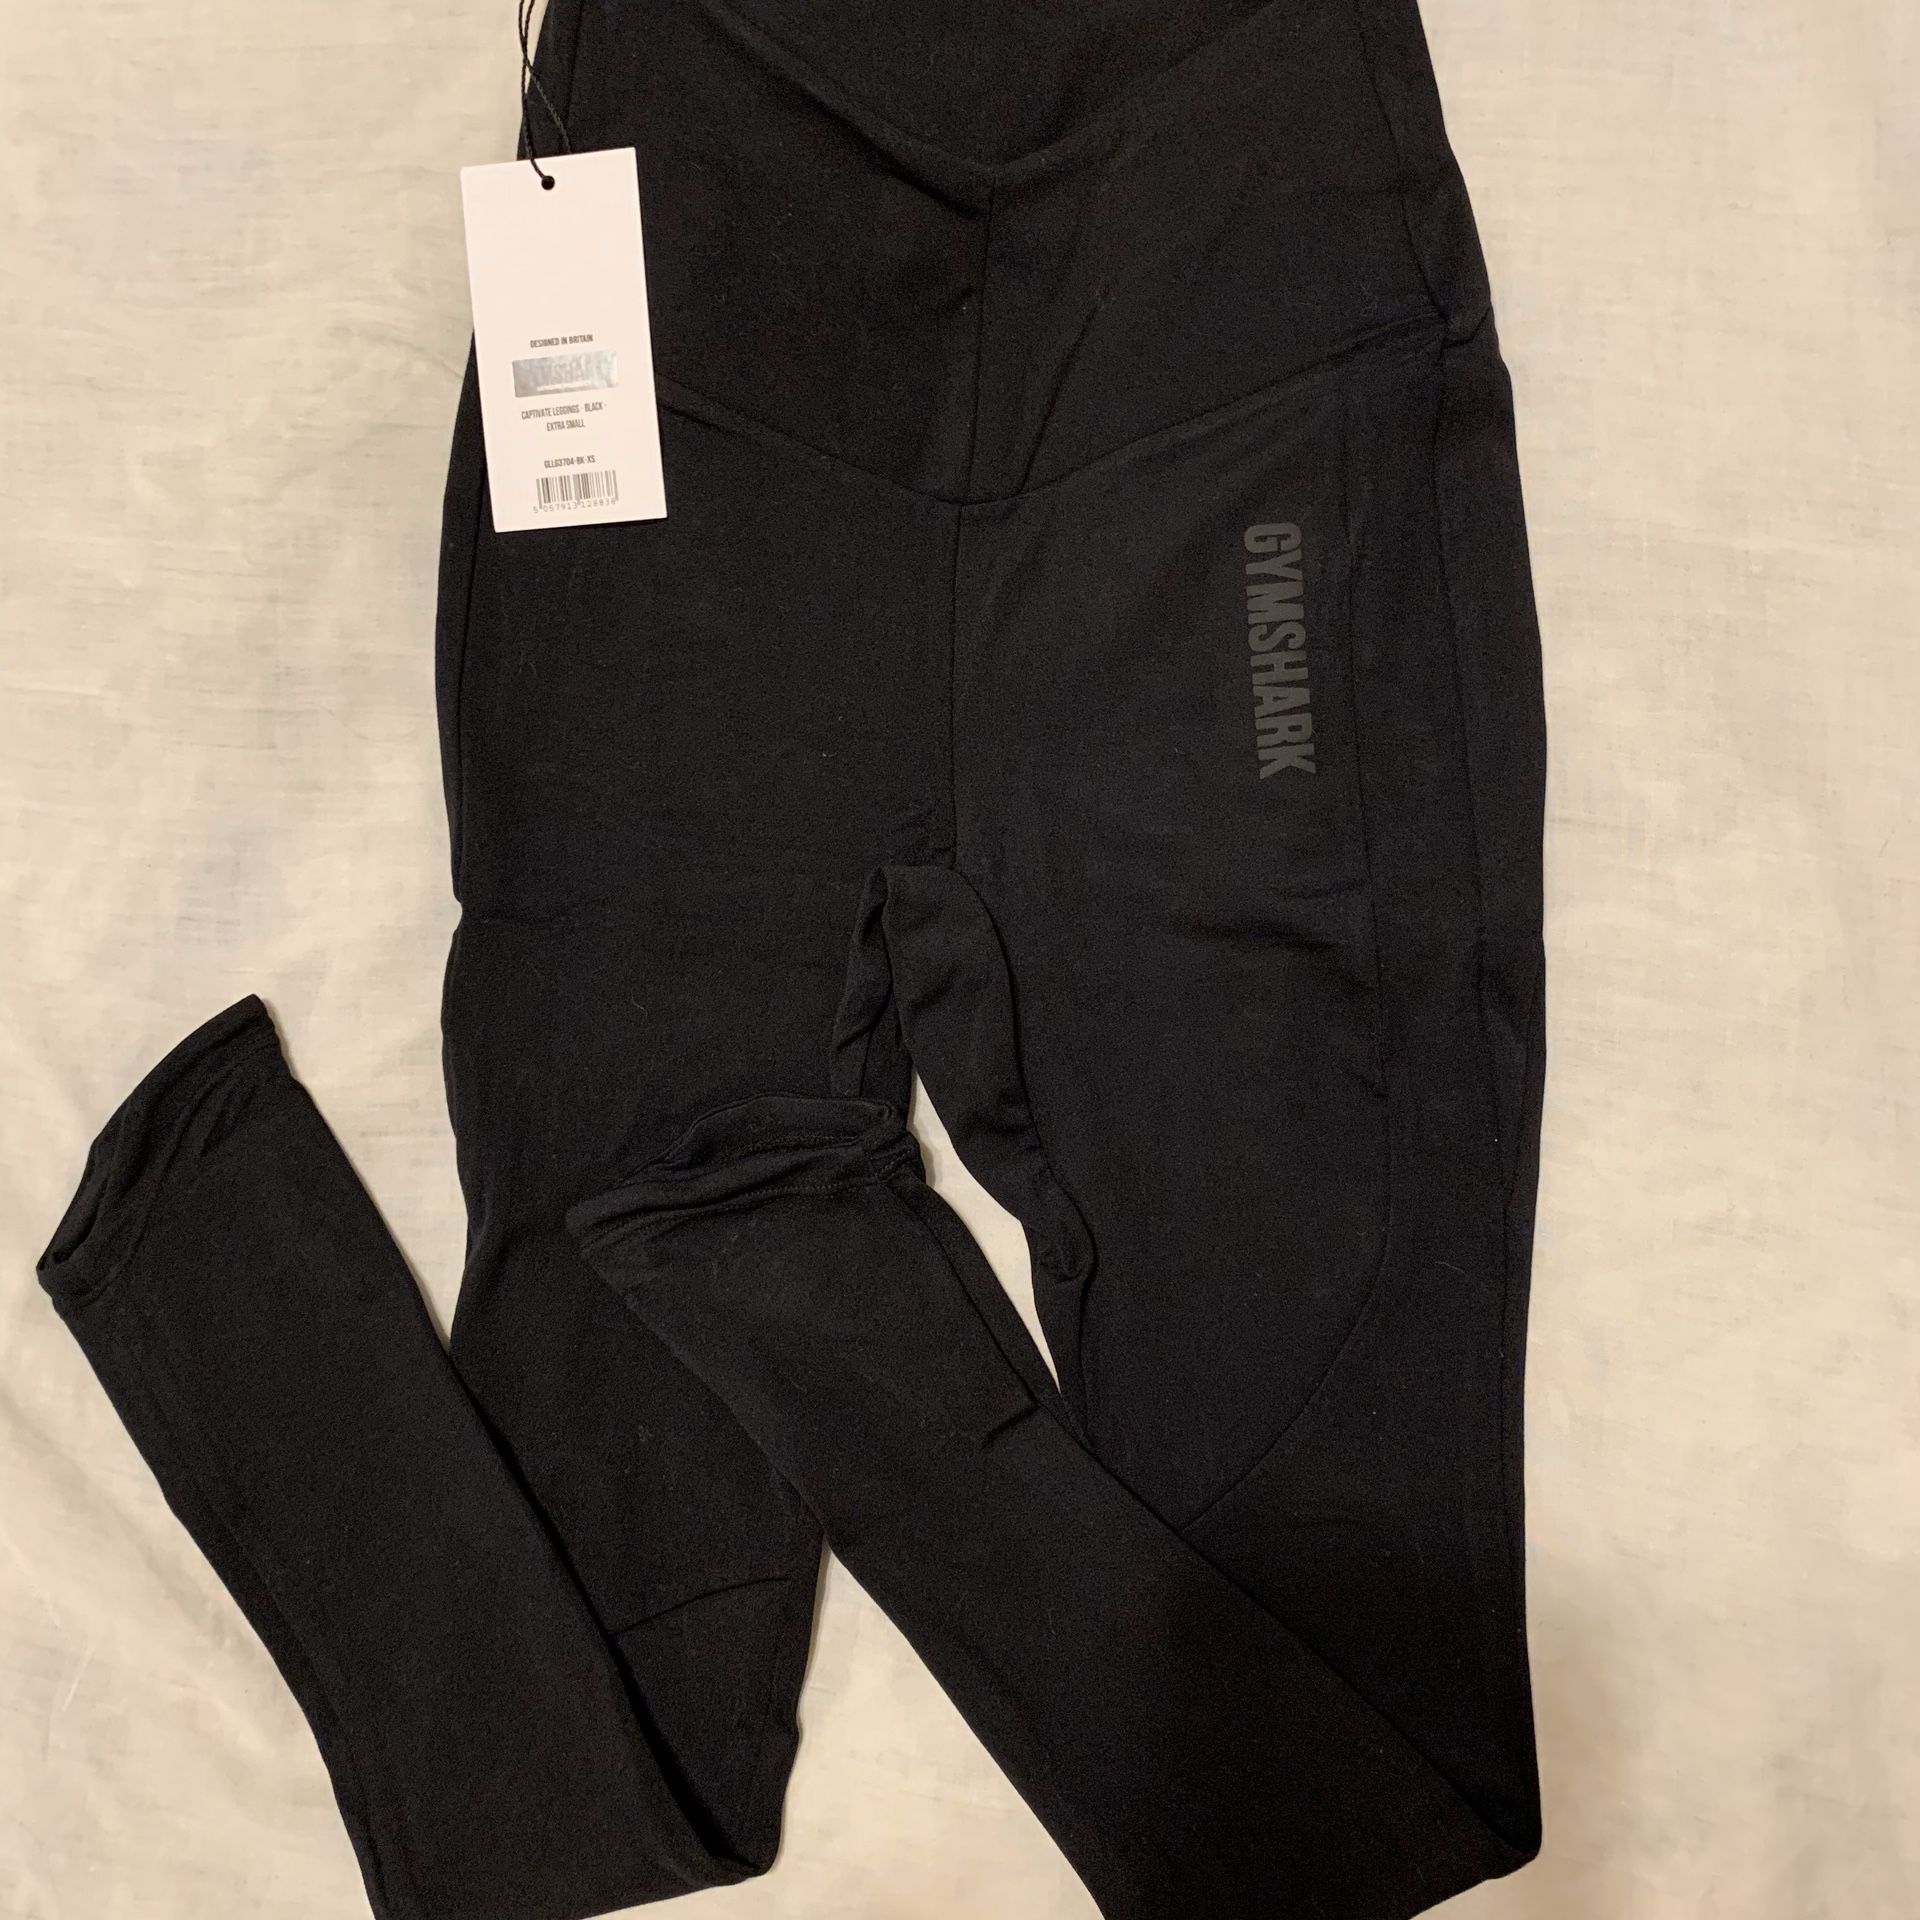 Gymshark athletic pants with original tags attached